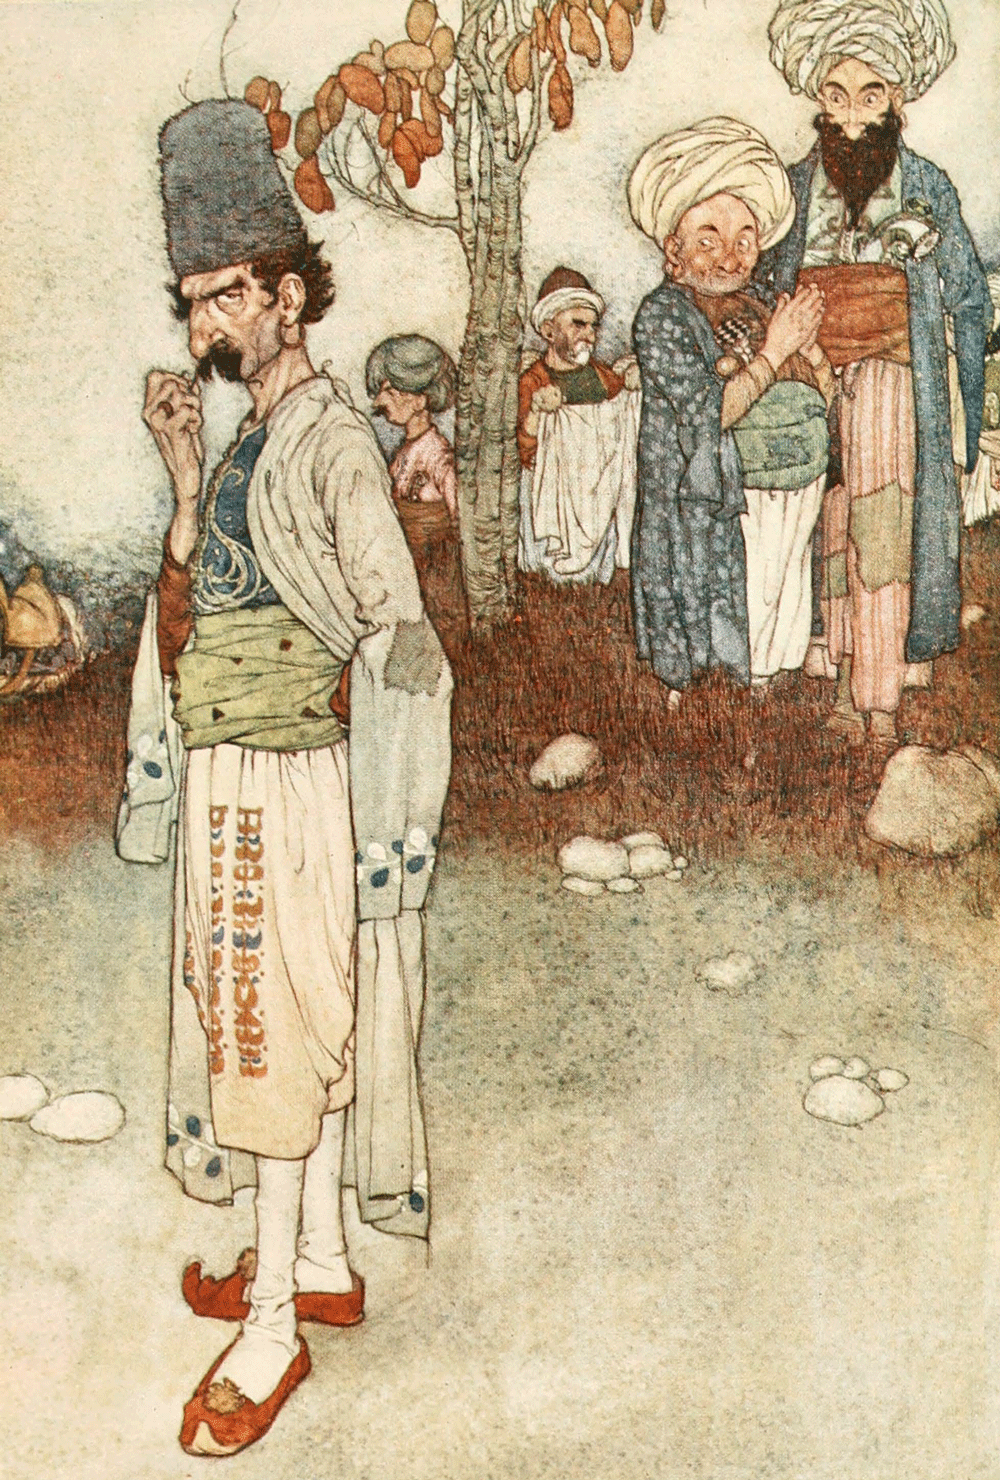 Ali Baba and the Forty Thieves, Edmund Dulac, Arabian Nights